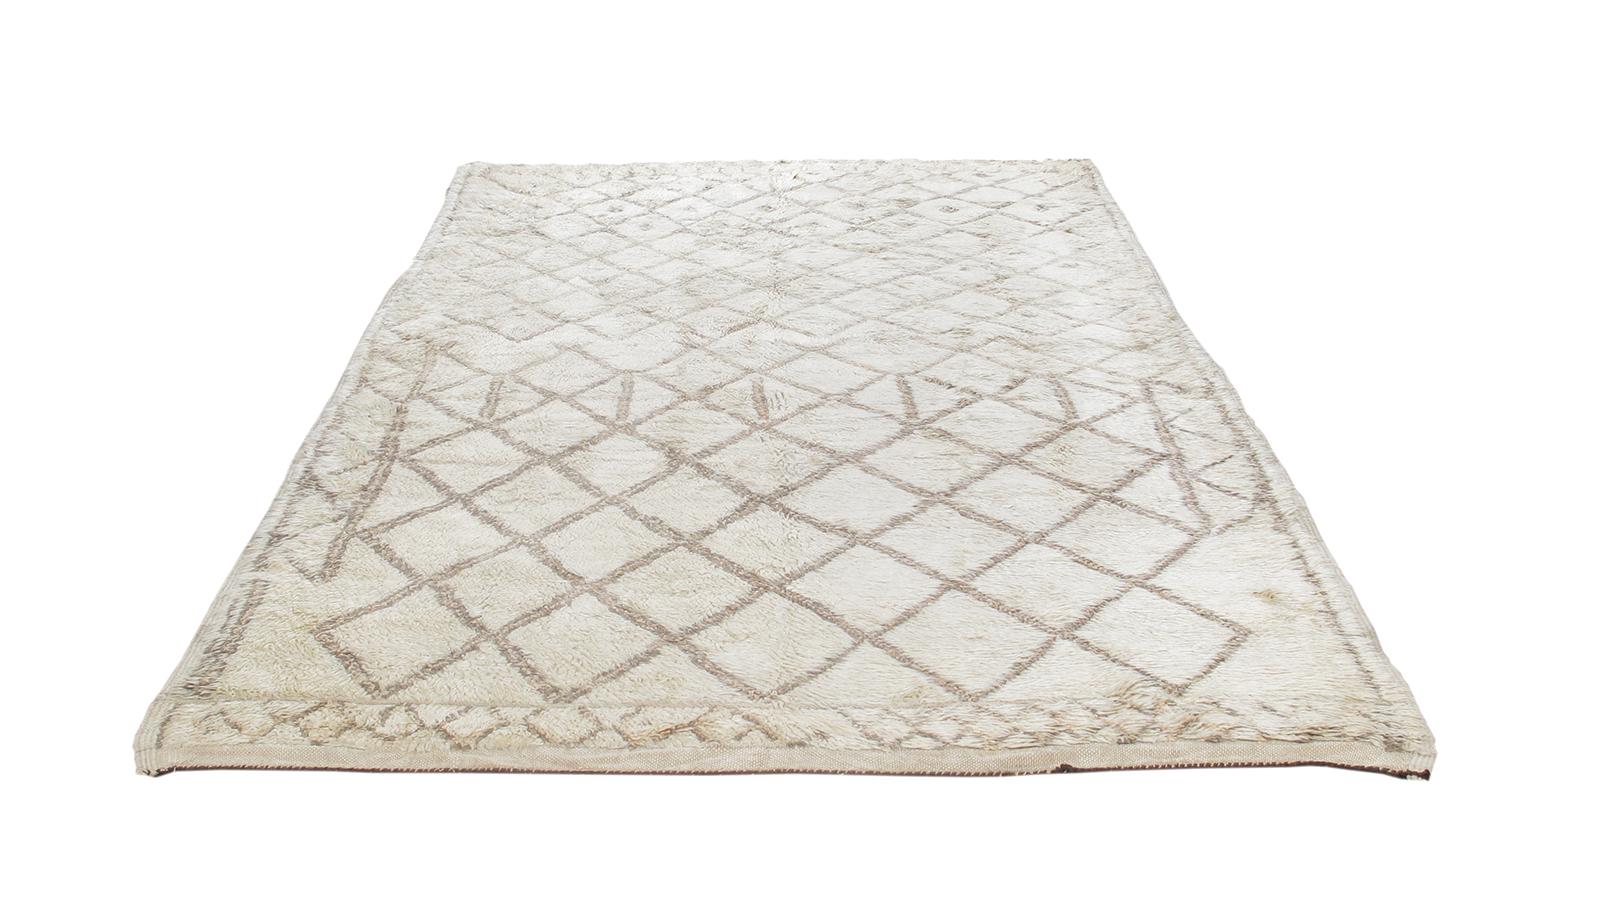 Tribal Vintage Moroccan Beni Ourani Hand Knotted Rug in Cream and Light Brown Color For Sale